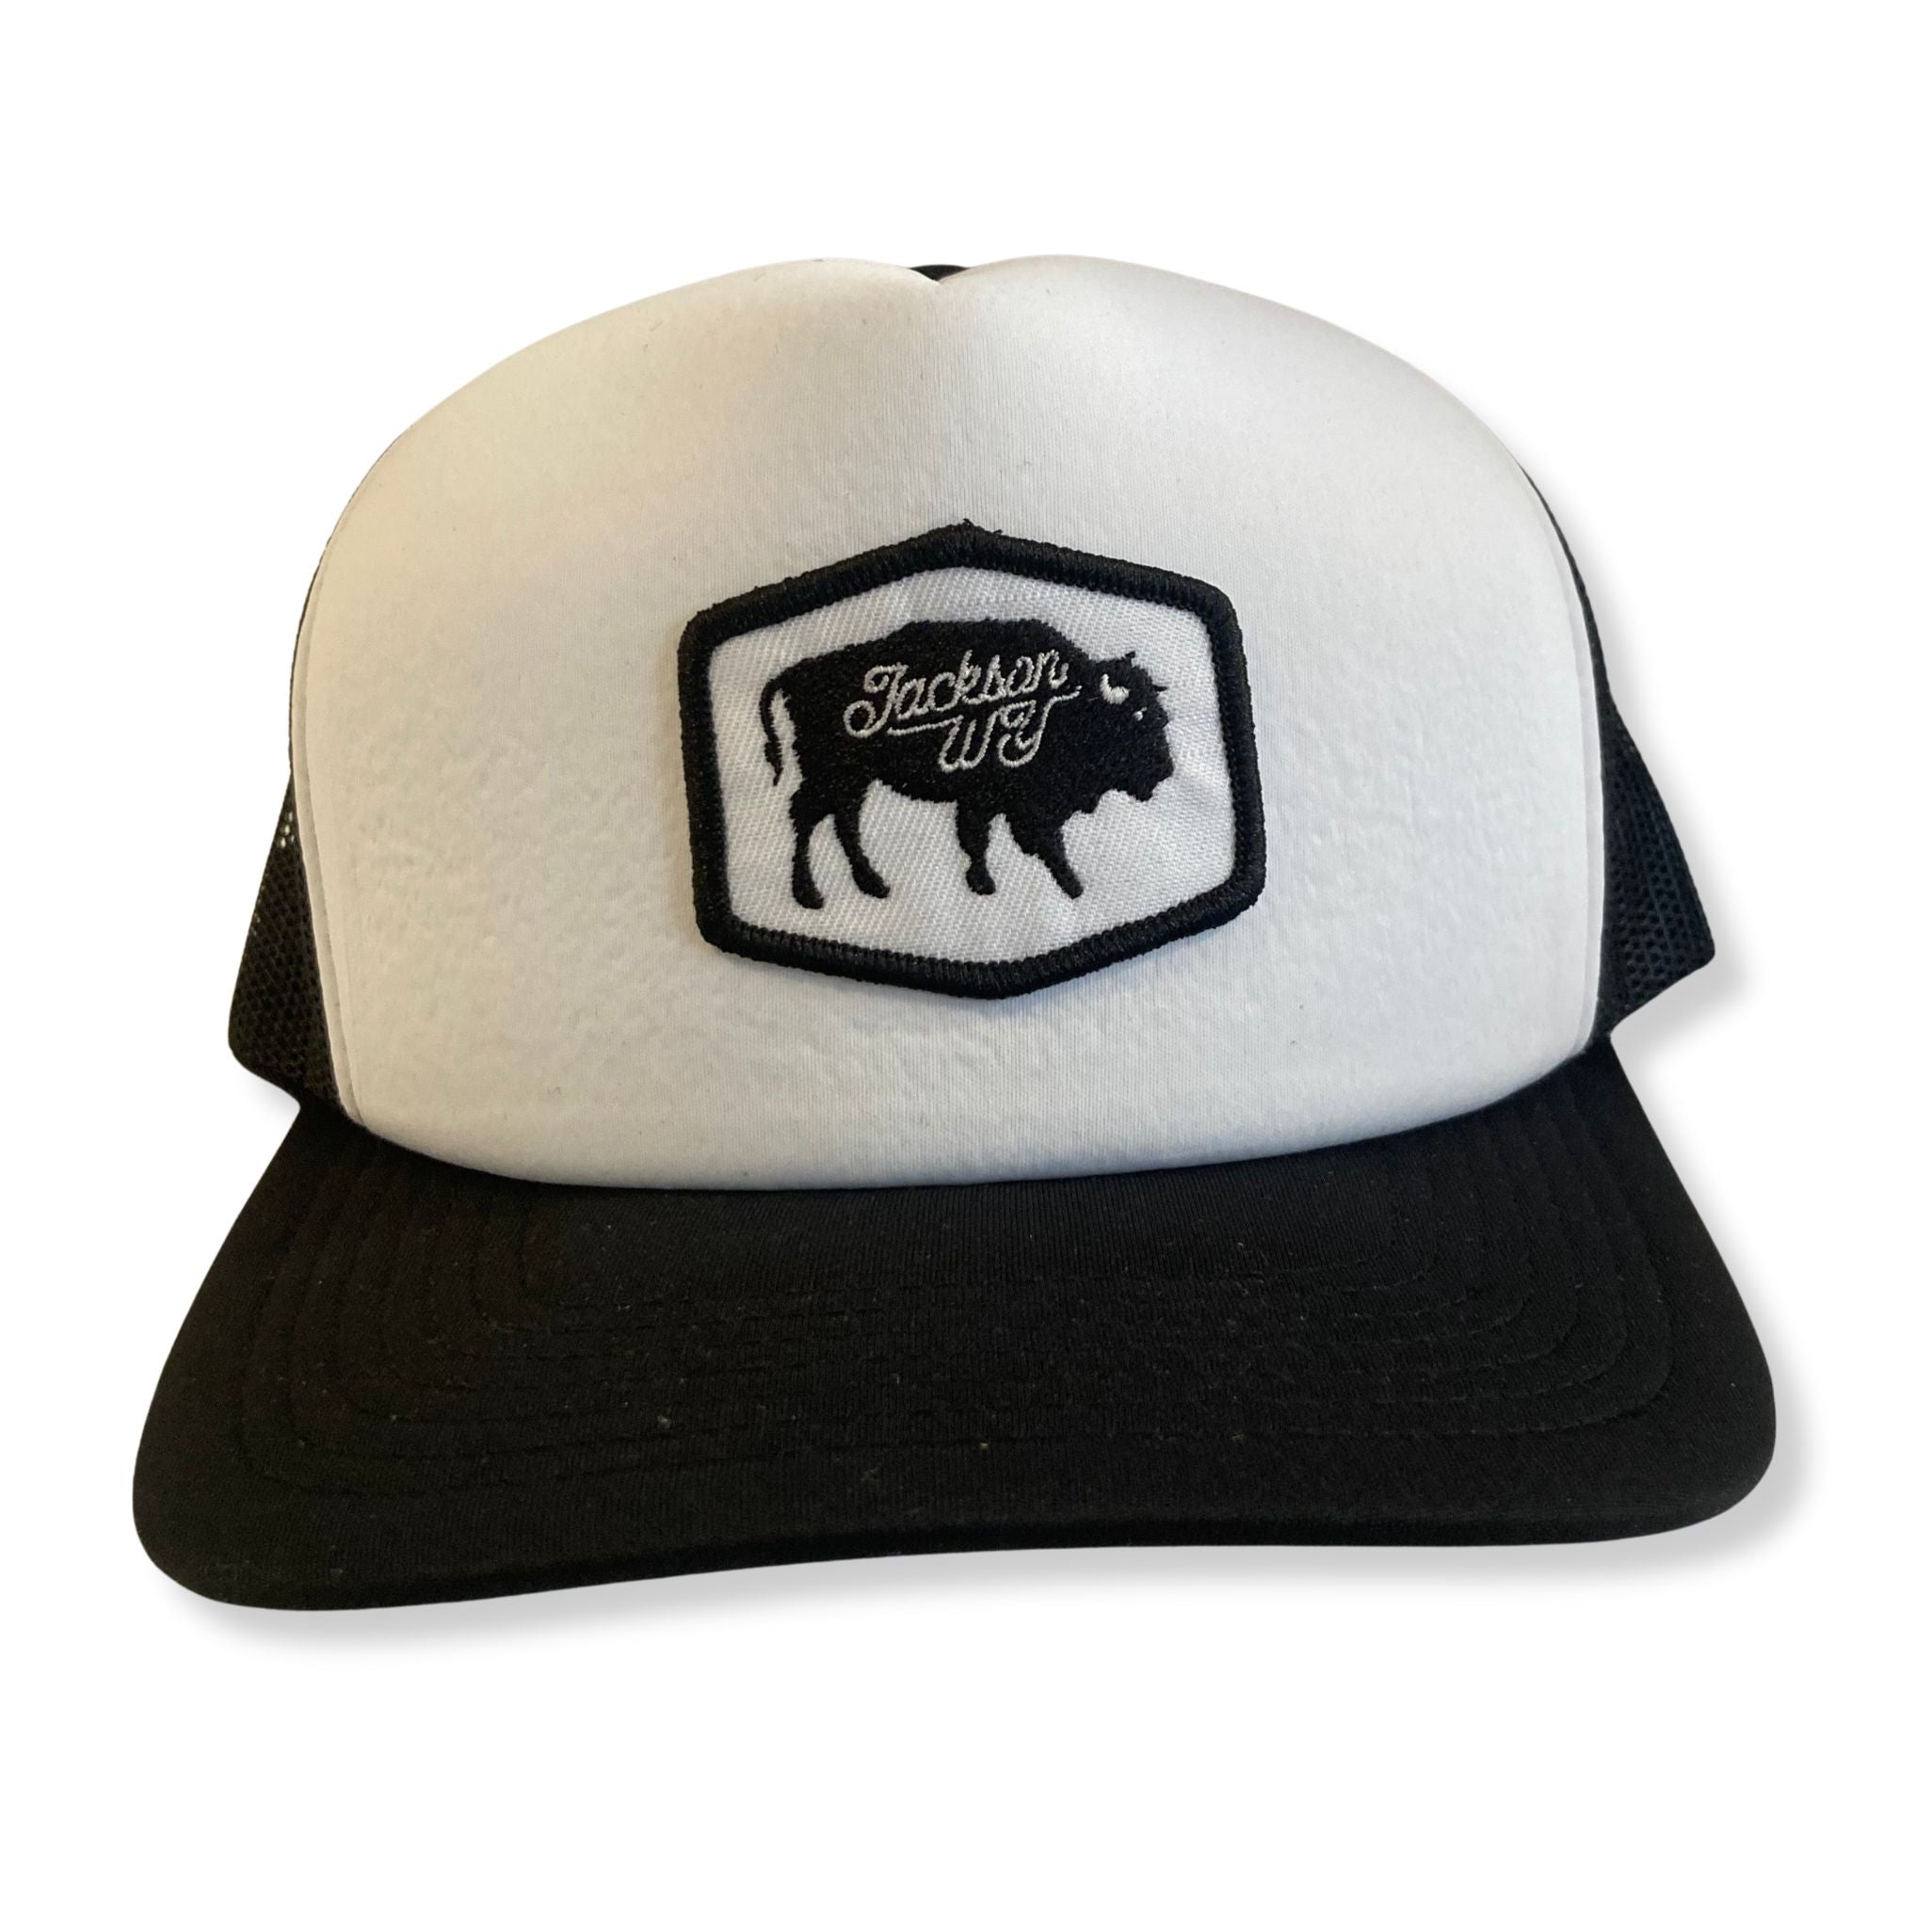 White and Black Foam Trucker Jackson Wy Bison Patch Hat